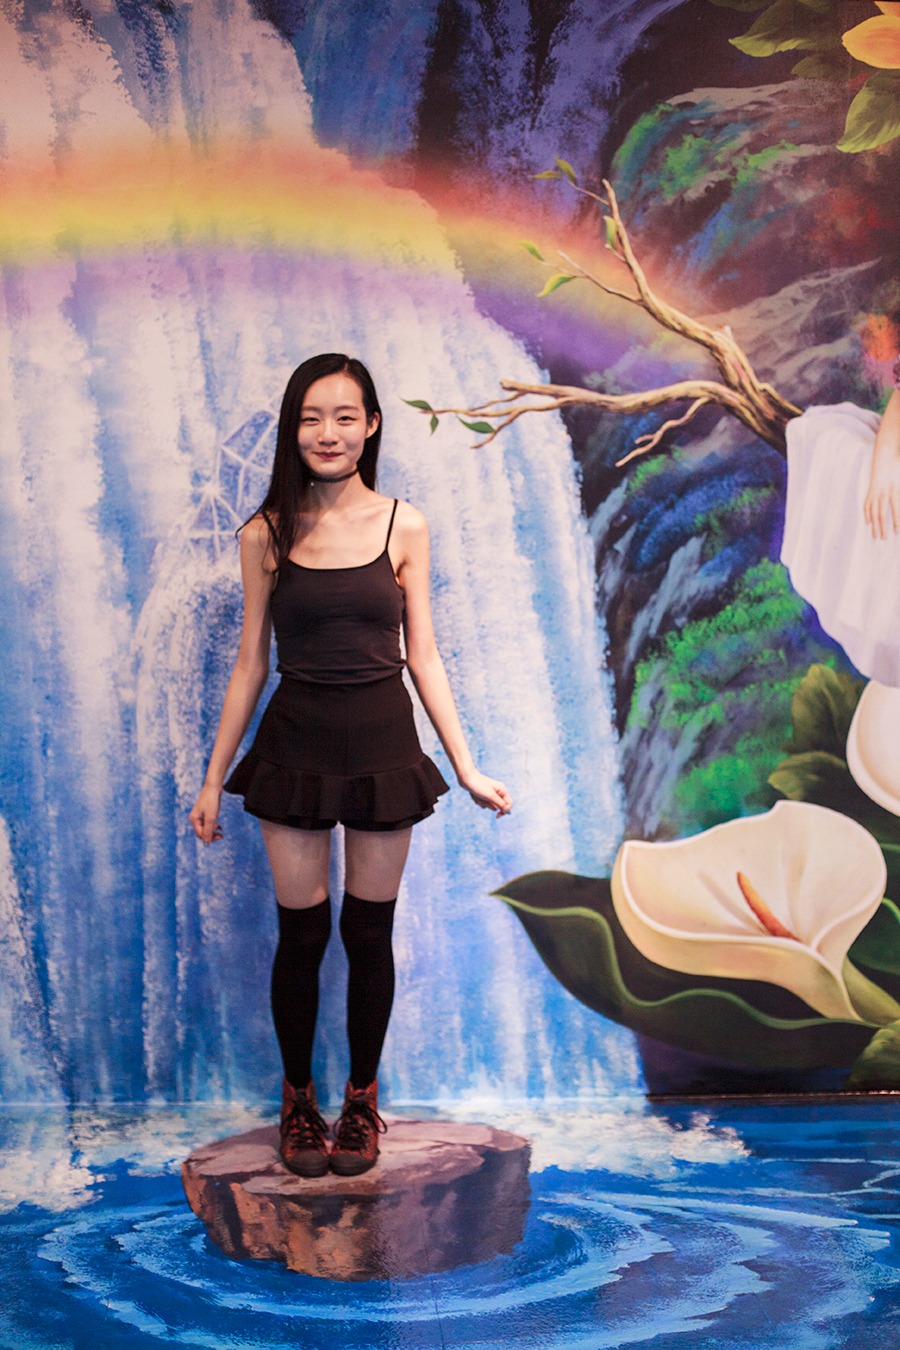 Standing on a log in front of a fairytale scene trompe-l'œil at the Trick Eye Museum Renewal Event in Singapore, Resorts World Sentosa.